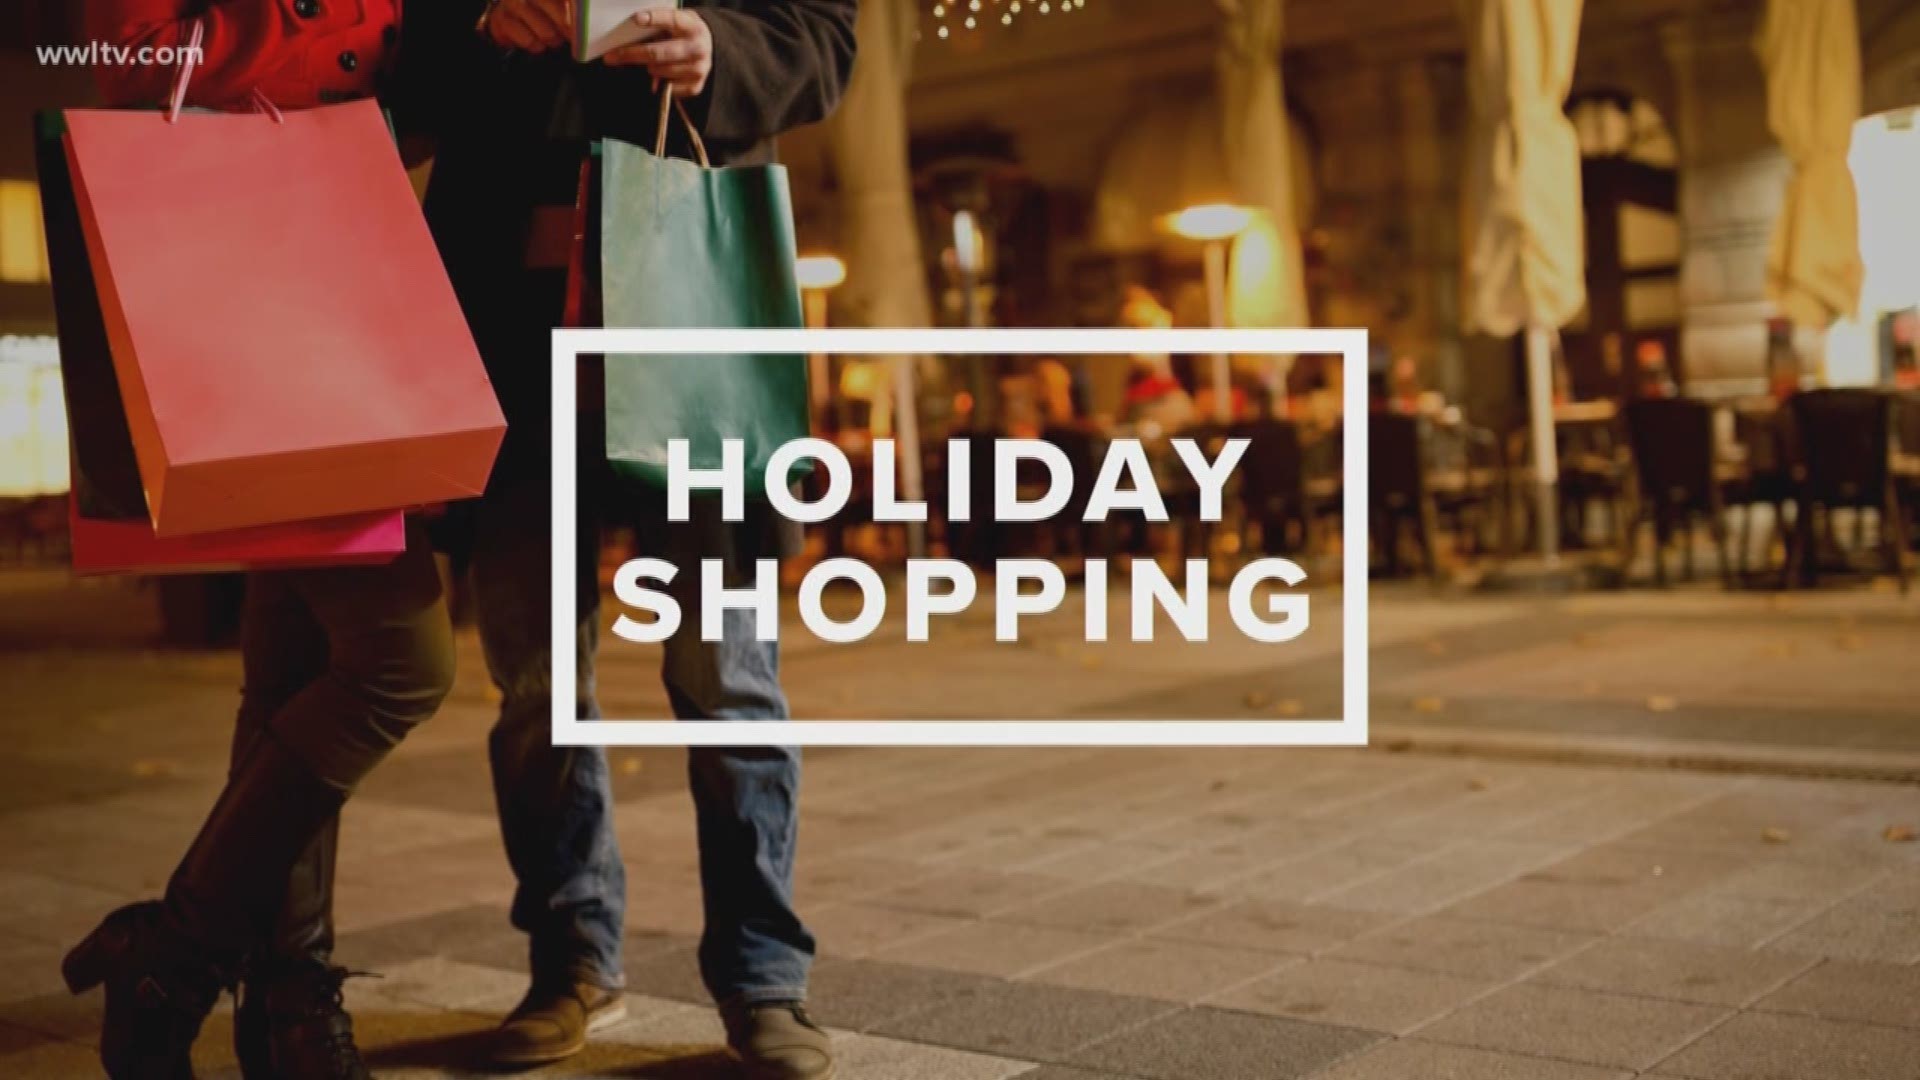 WWL-TV reporter Meghan Kee goes over some tips to protect yourself and stay safe while shopping during the holidays